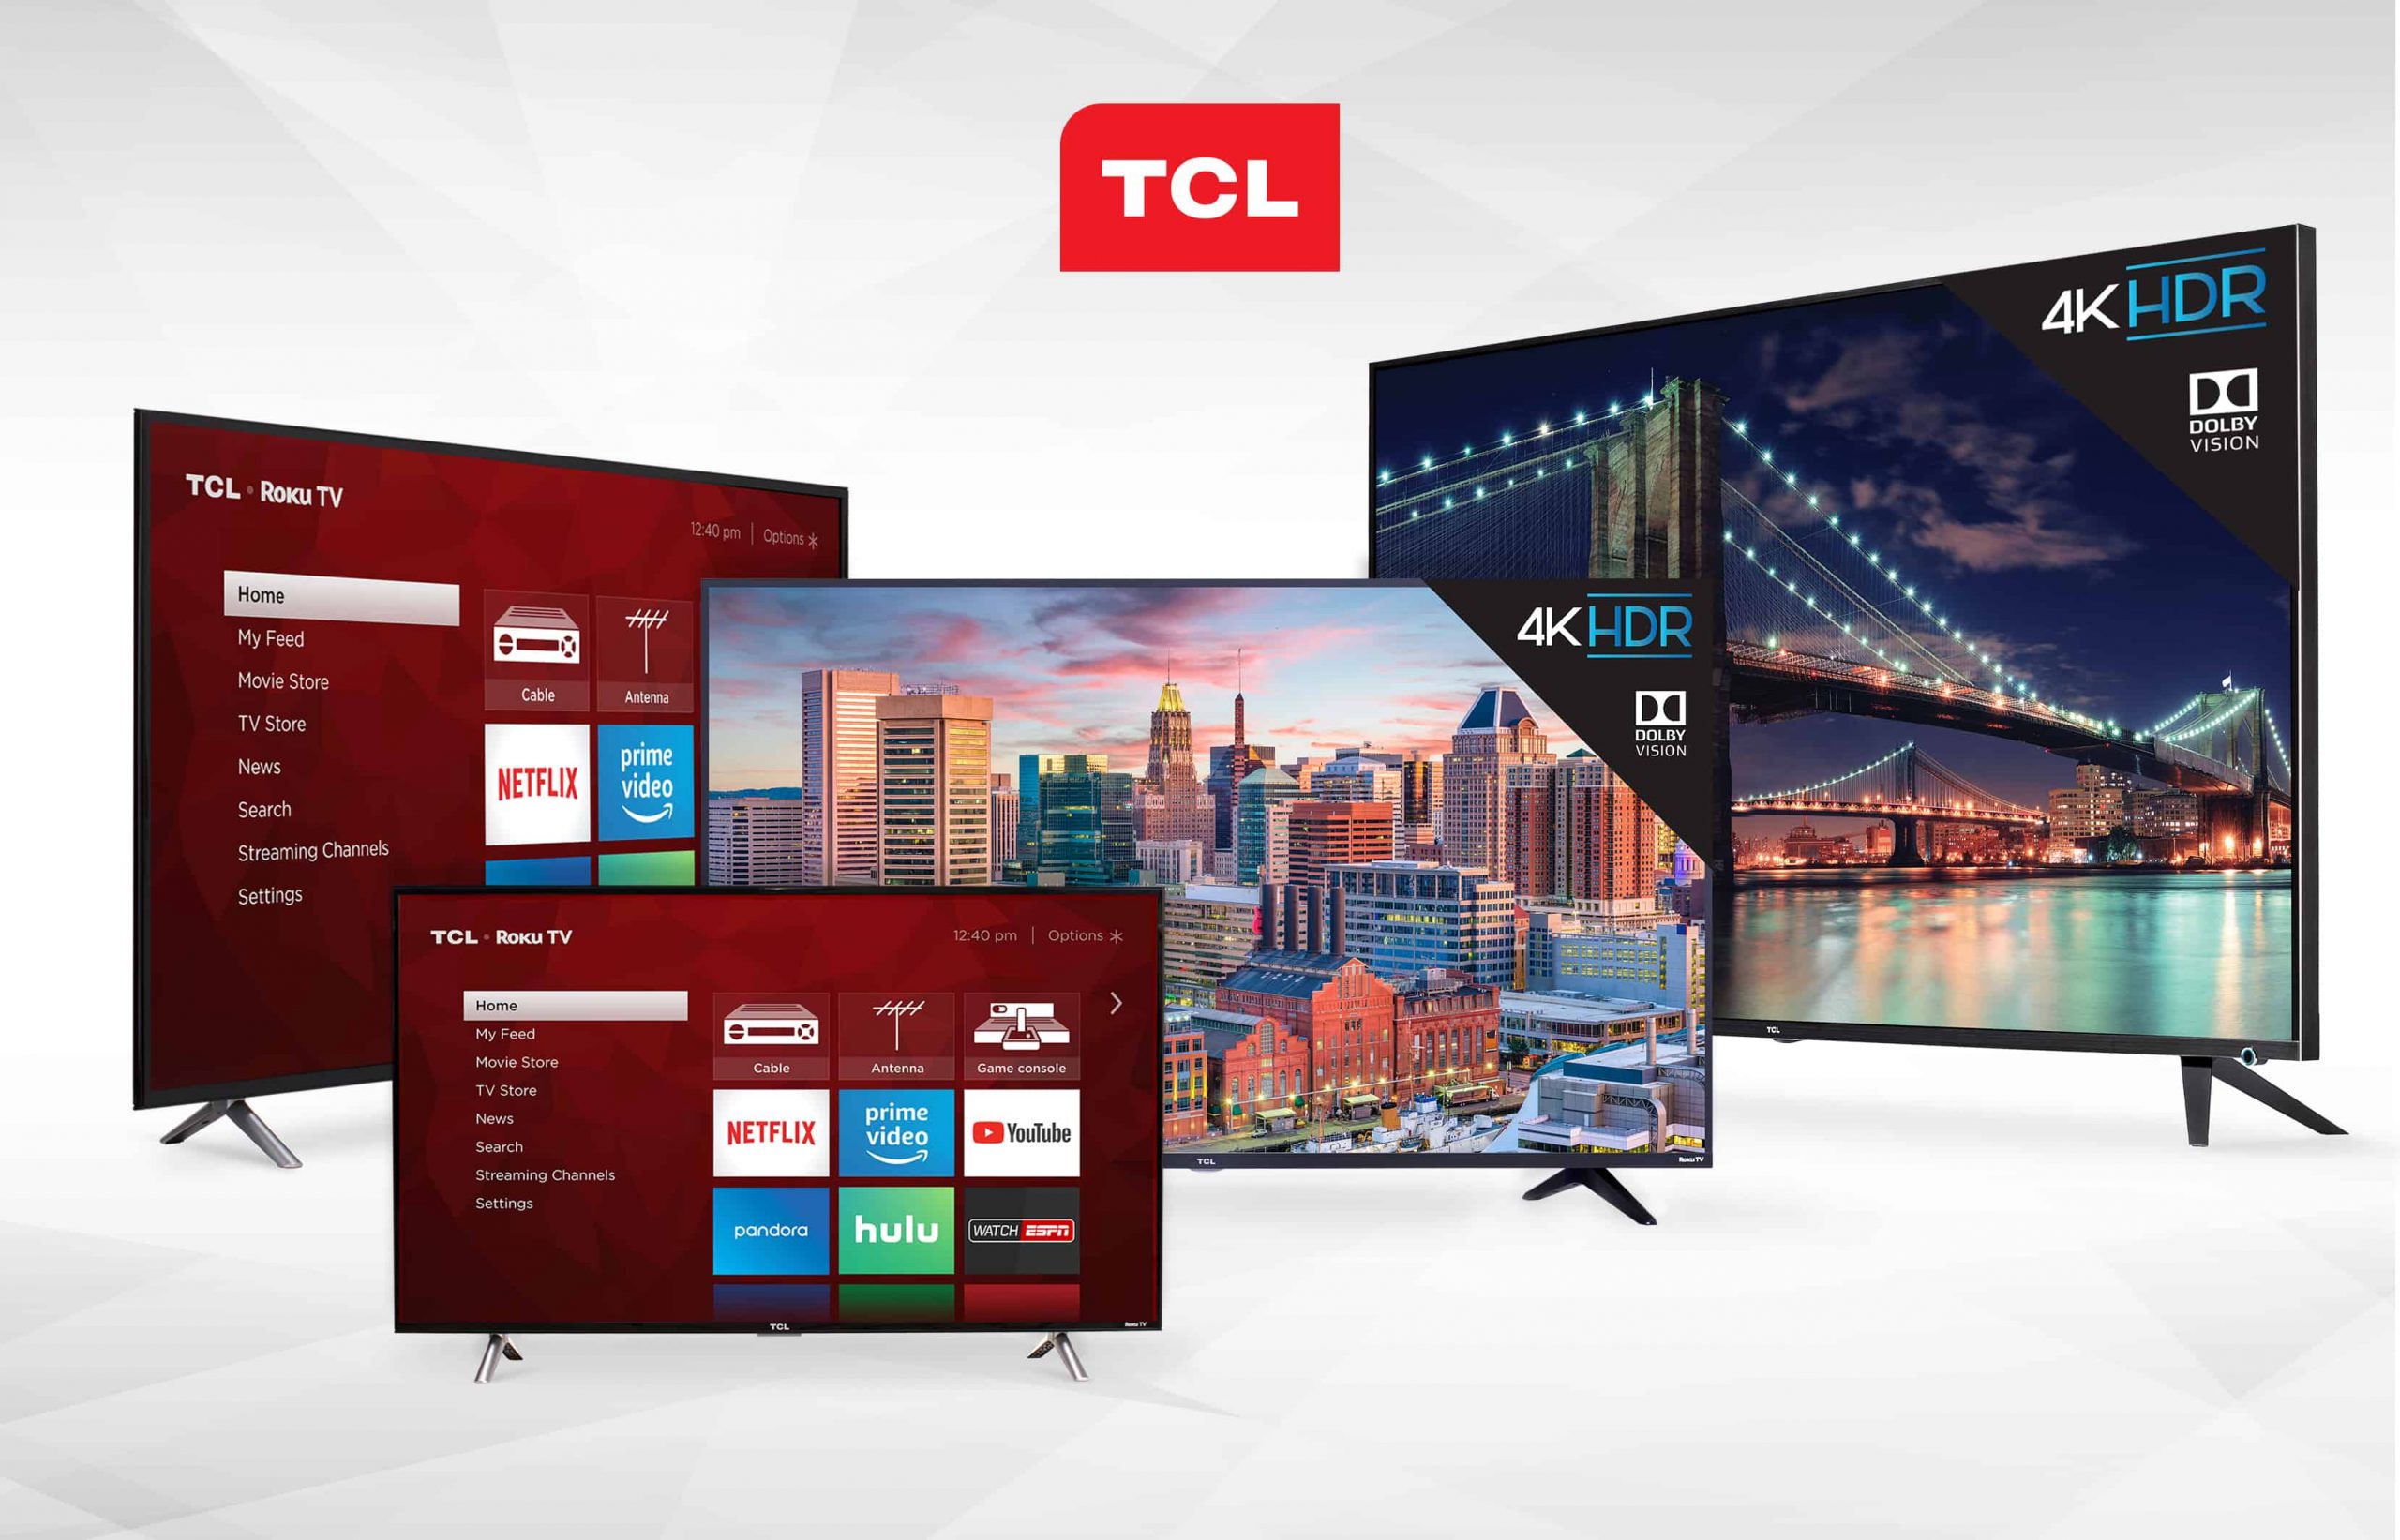 The best TCL TVs افضل تلفزيونات تي سي إل TCL